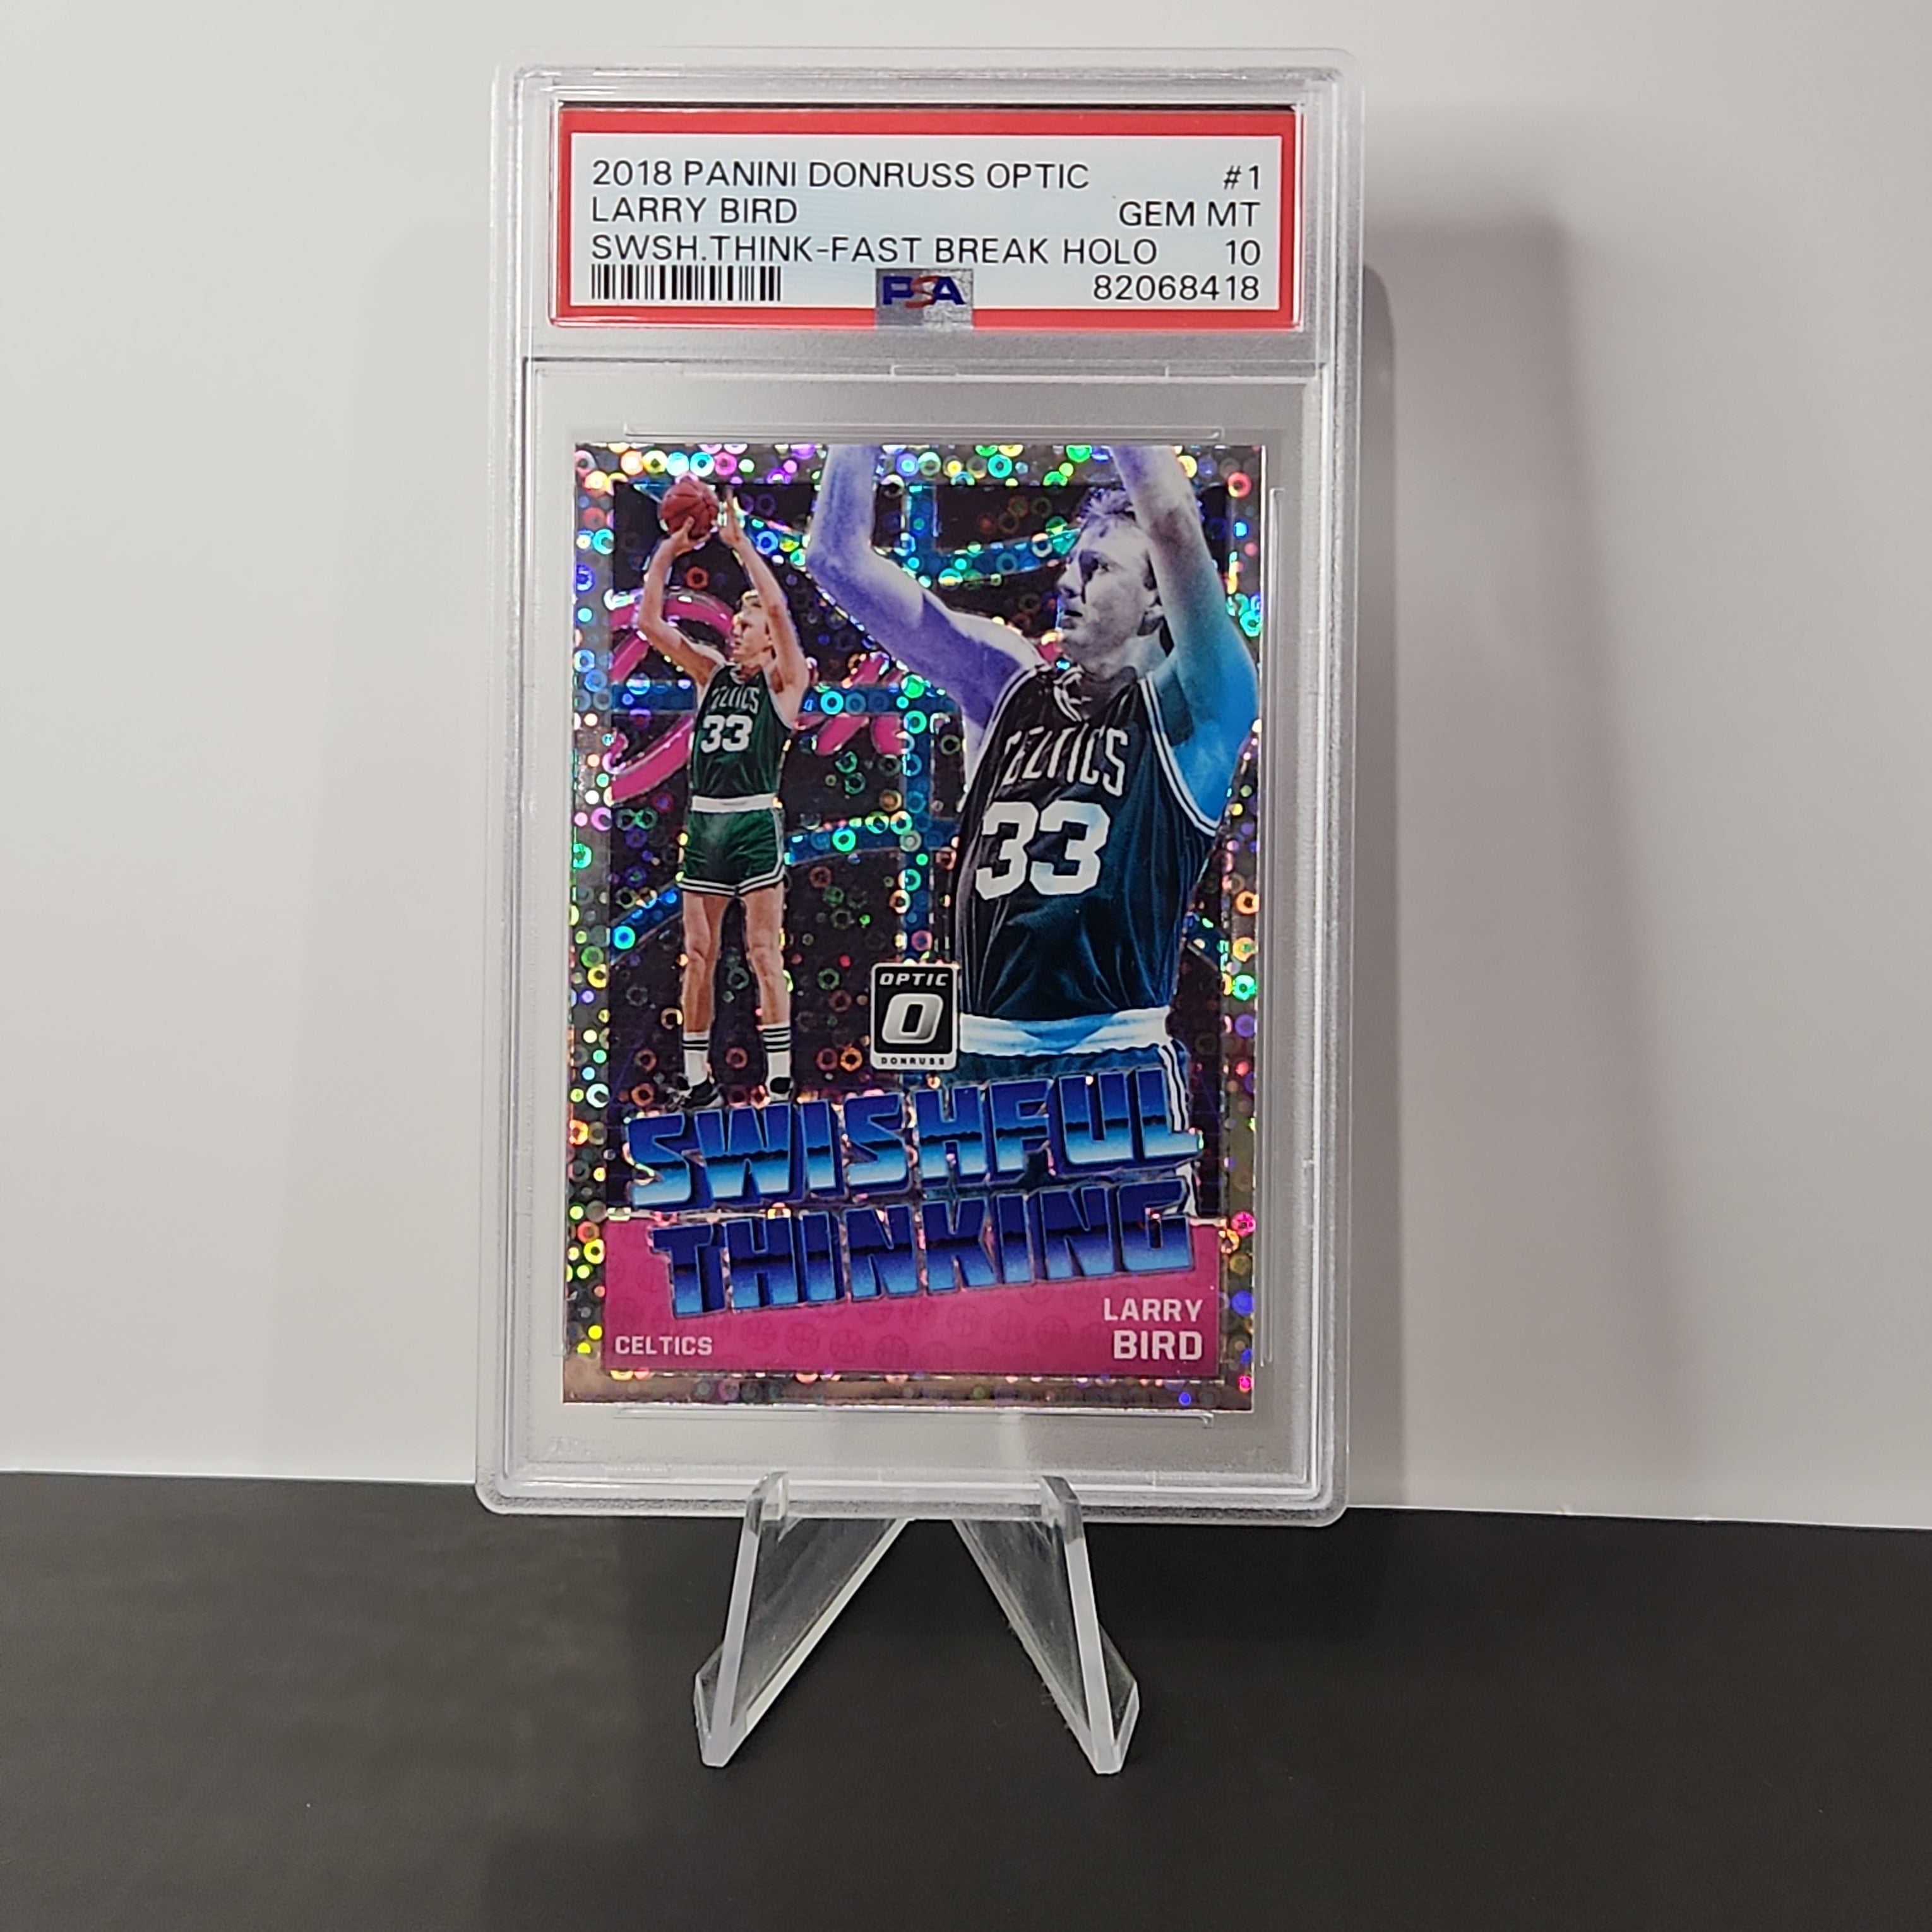 Larry Bird 2018/19 Donruss Swishful Thinking Holo **PSA GEM MINT 10** - Premium  from 1of1 Collectables - Just $295! Shop now at 1of1 Collectables